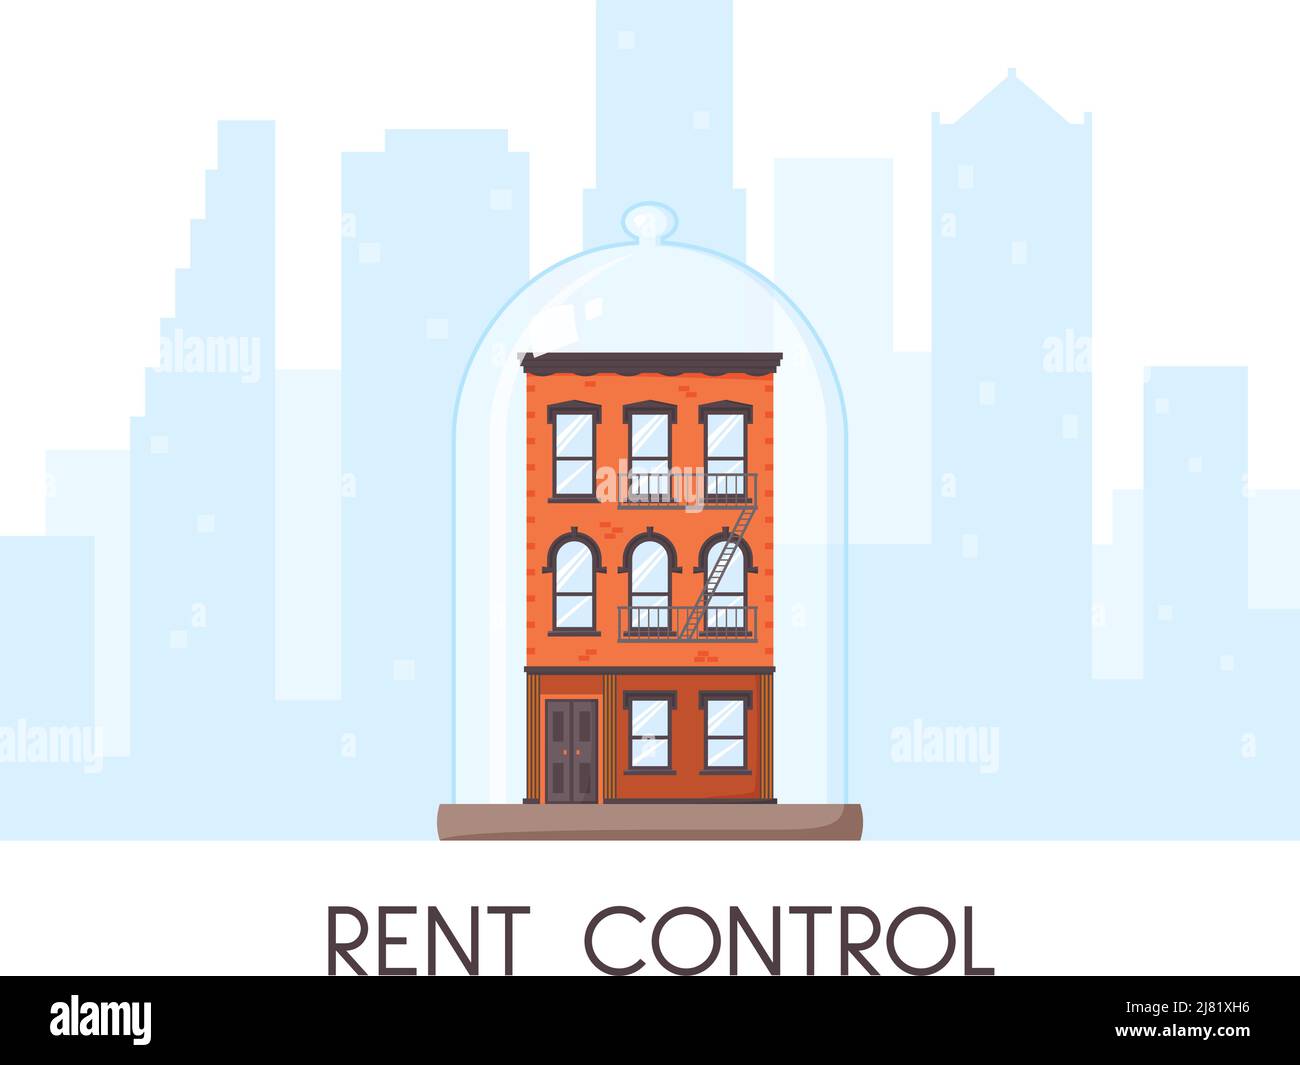 Rent control house concept. Old-fashioned house and city view silhouette. Brick building covered by glass dom. Rent stabilized apartment unit. Well Stock Vector